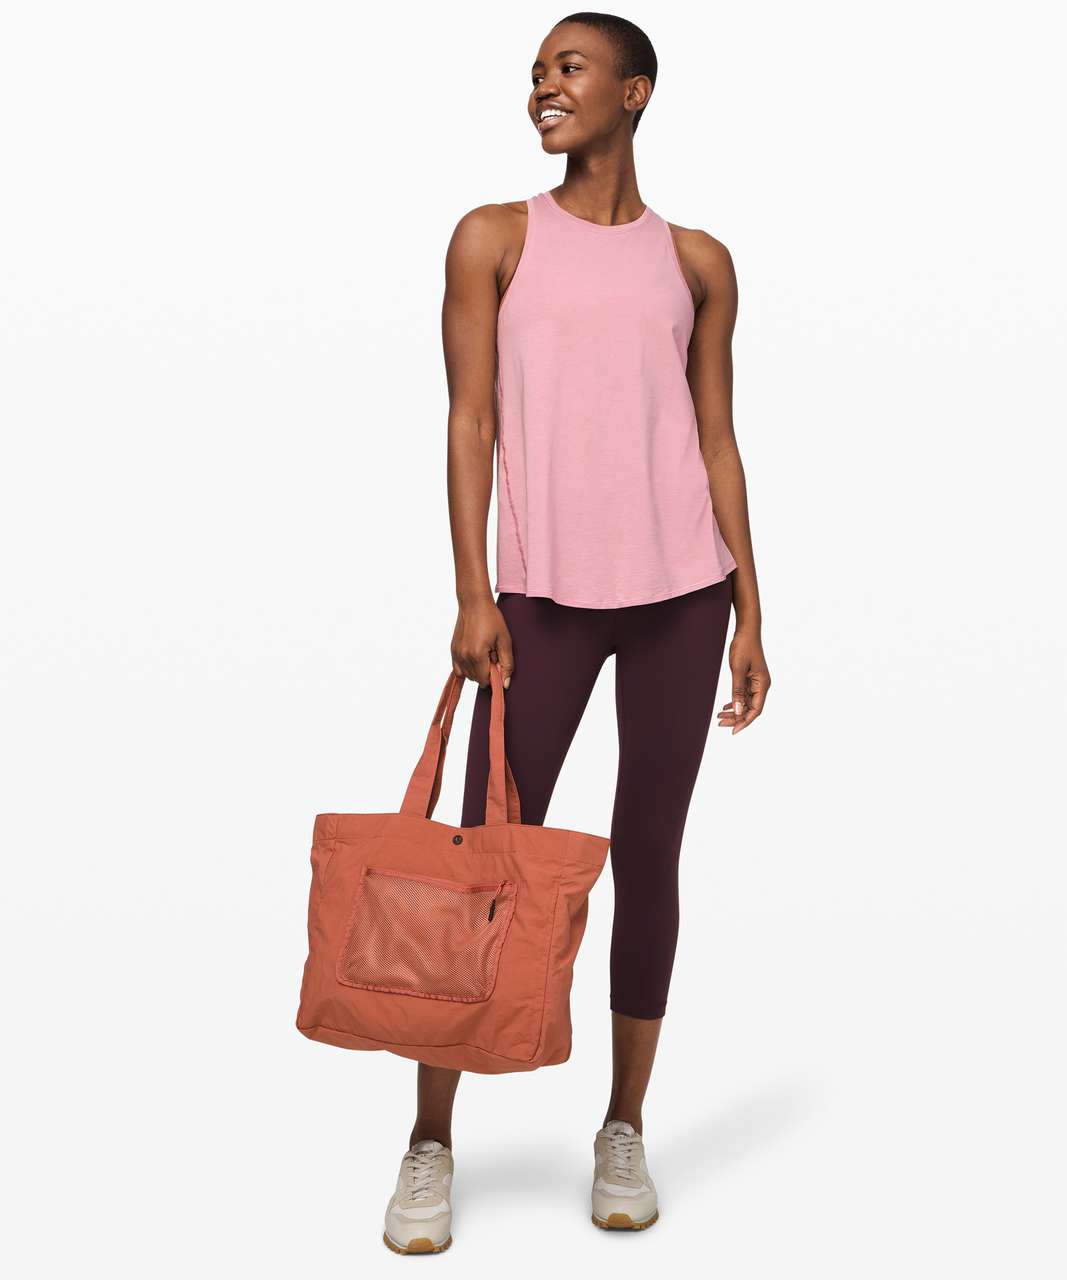 Lululemon All Tied Up Tank - Pink Taupe